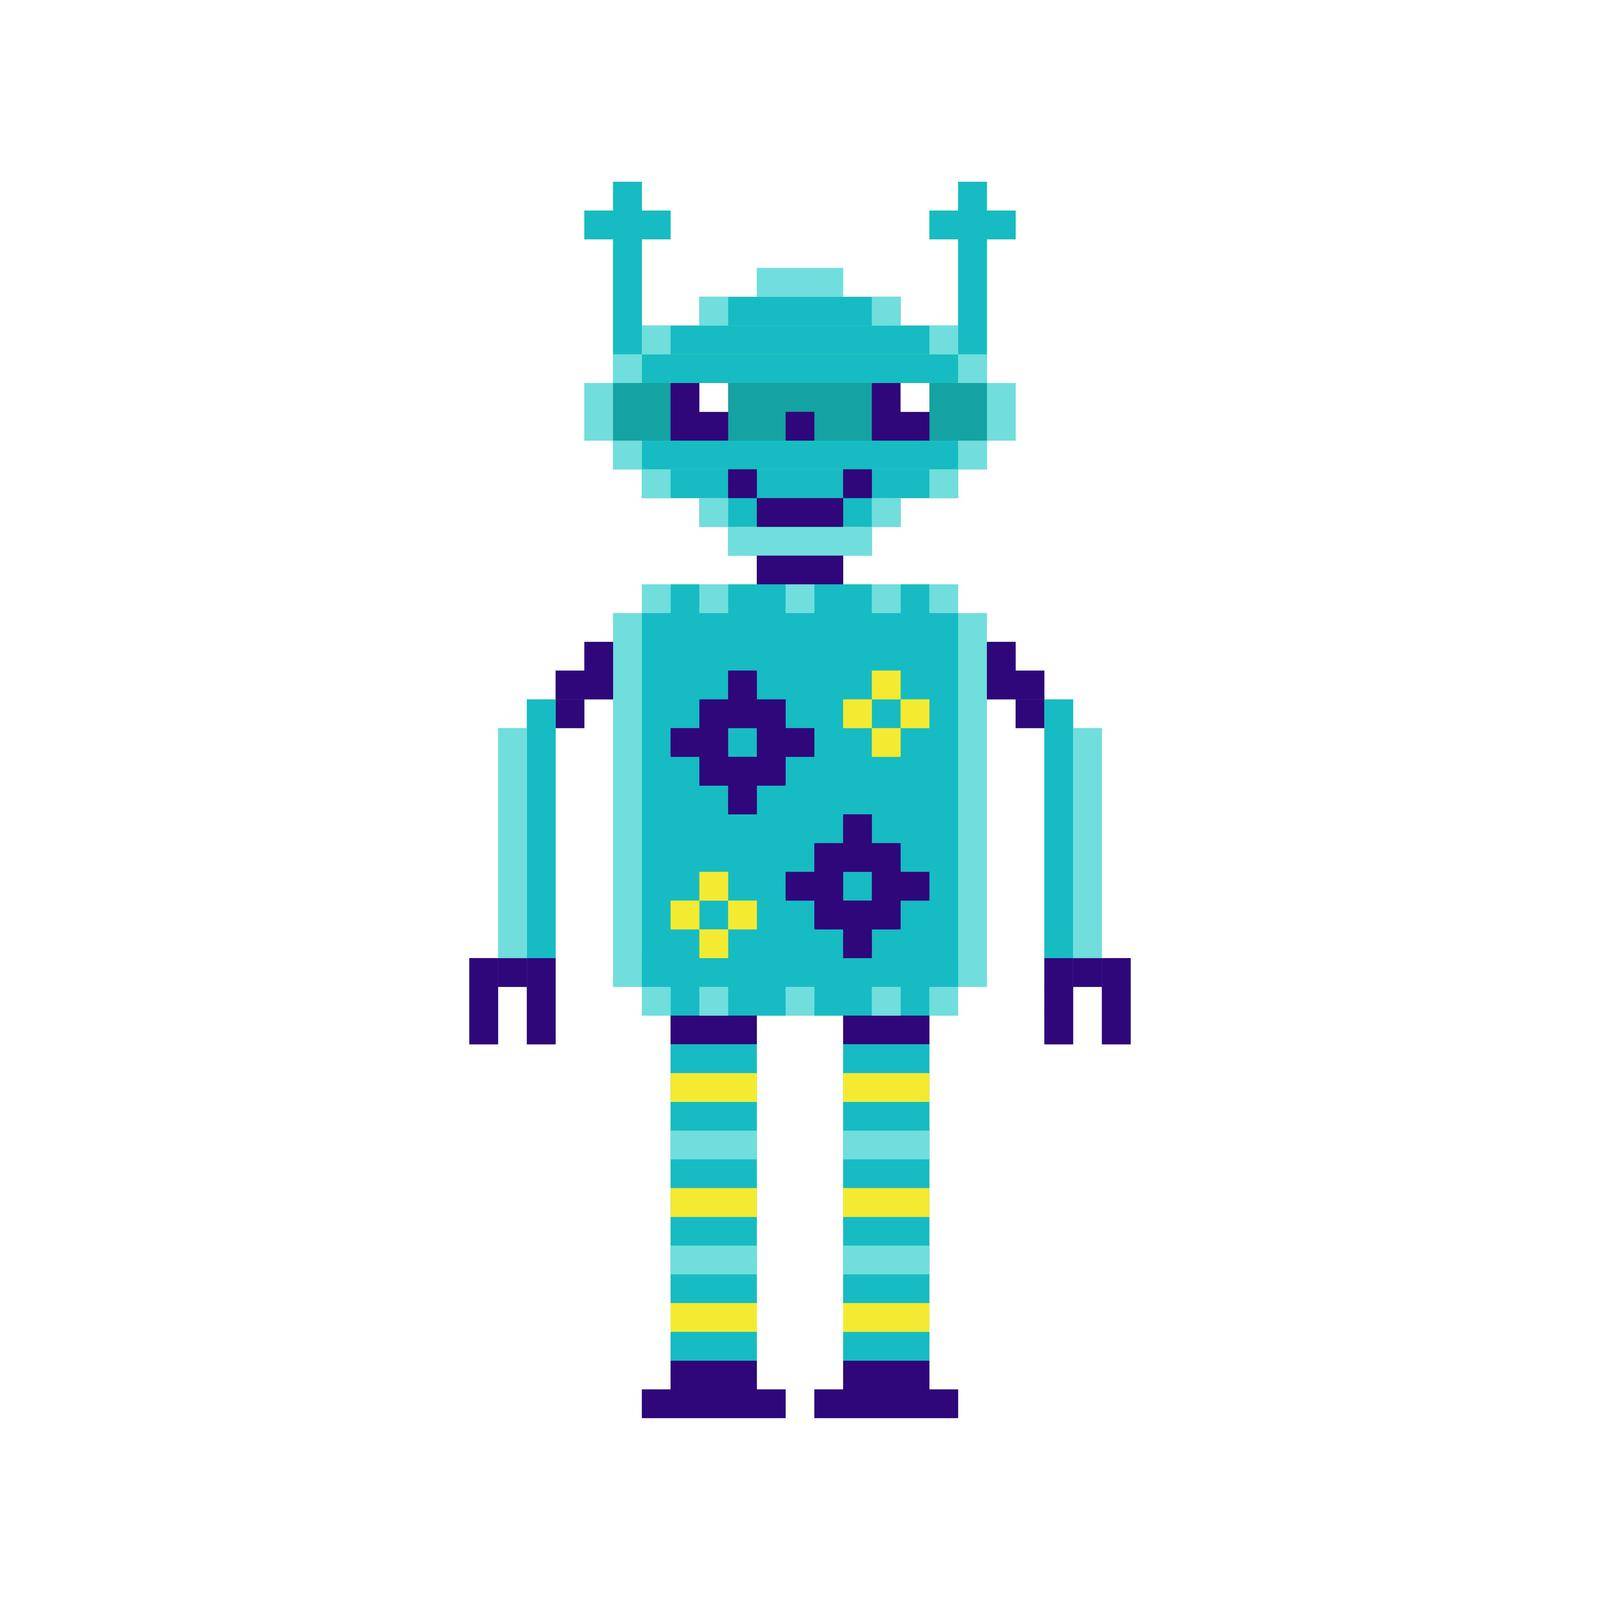 Robot in pixel art style on white background.